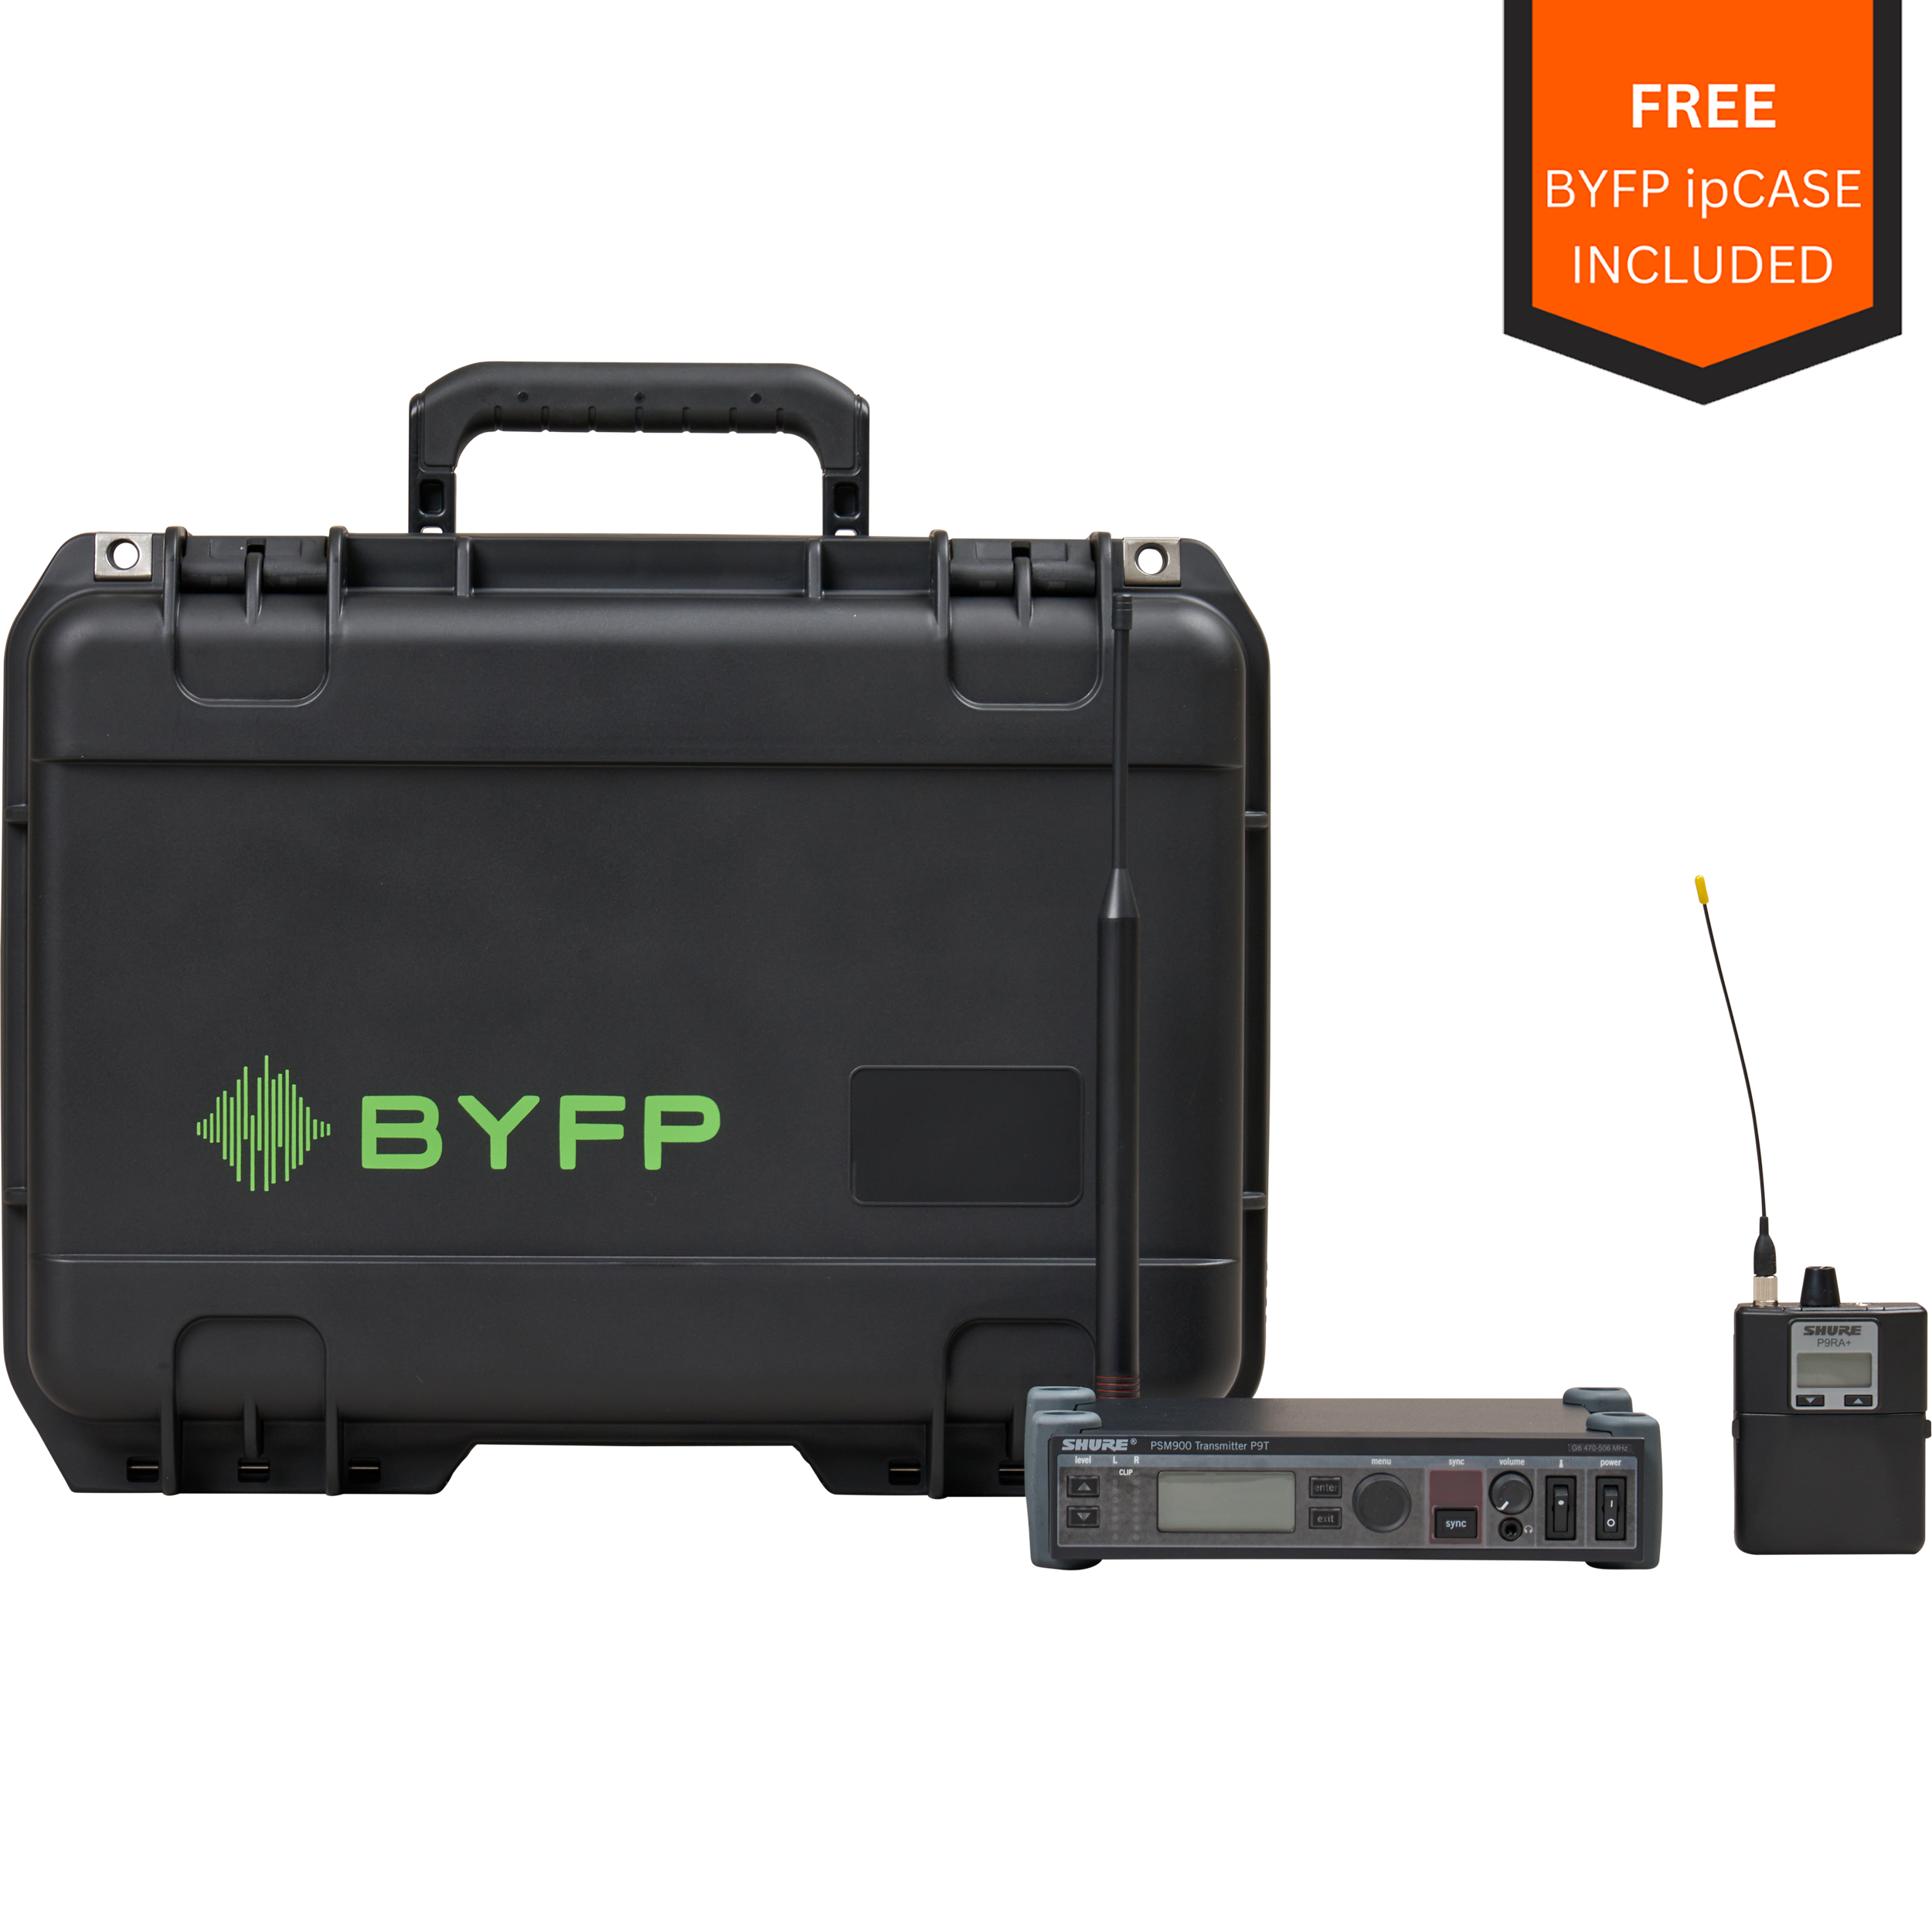 Shure PSM900 In-Ear Personal Monitoring System tourPack with BYFP ipCase